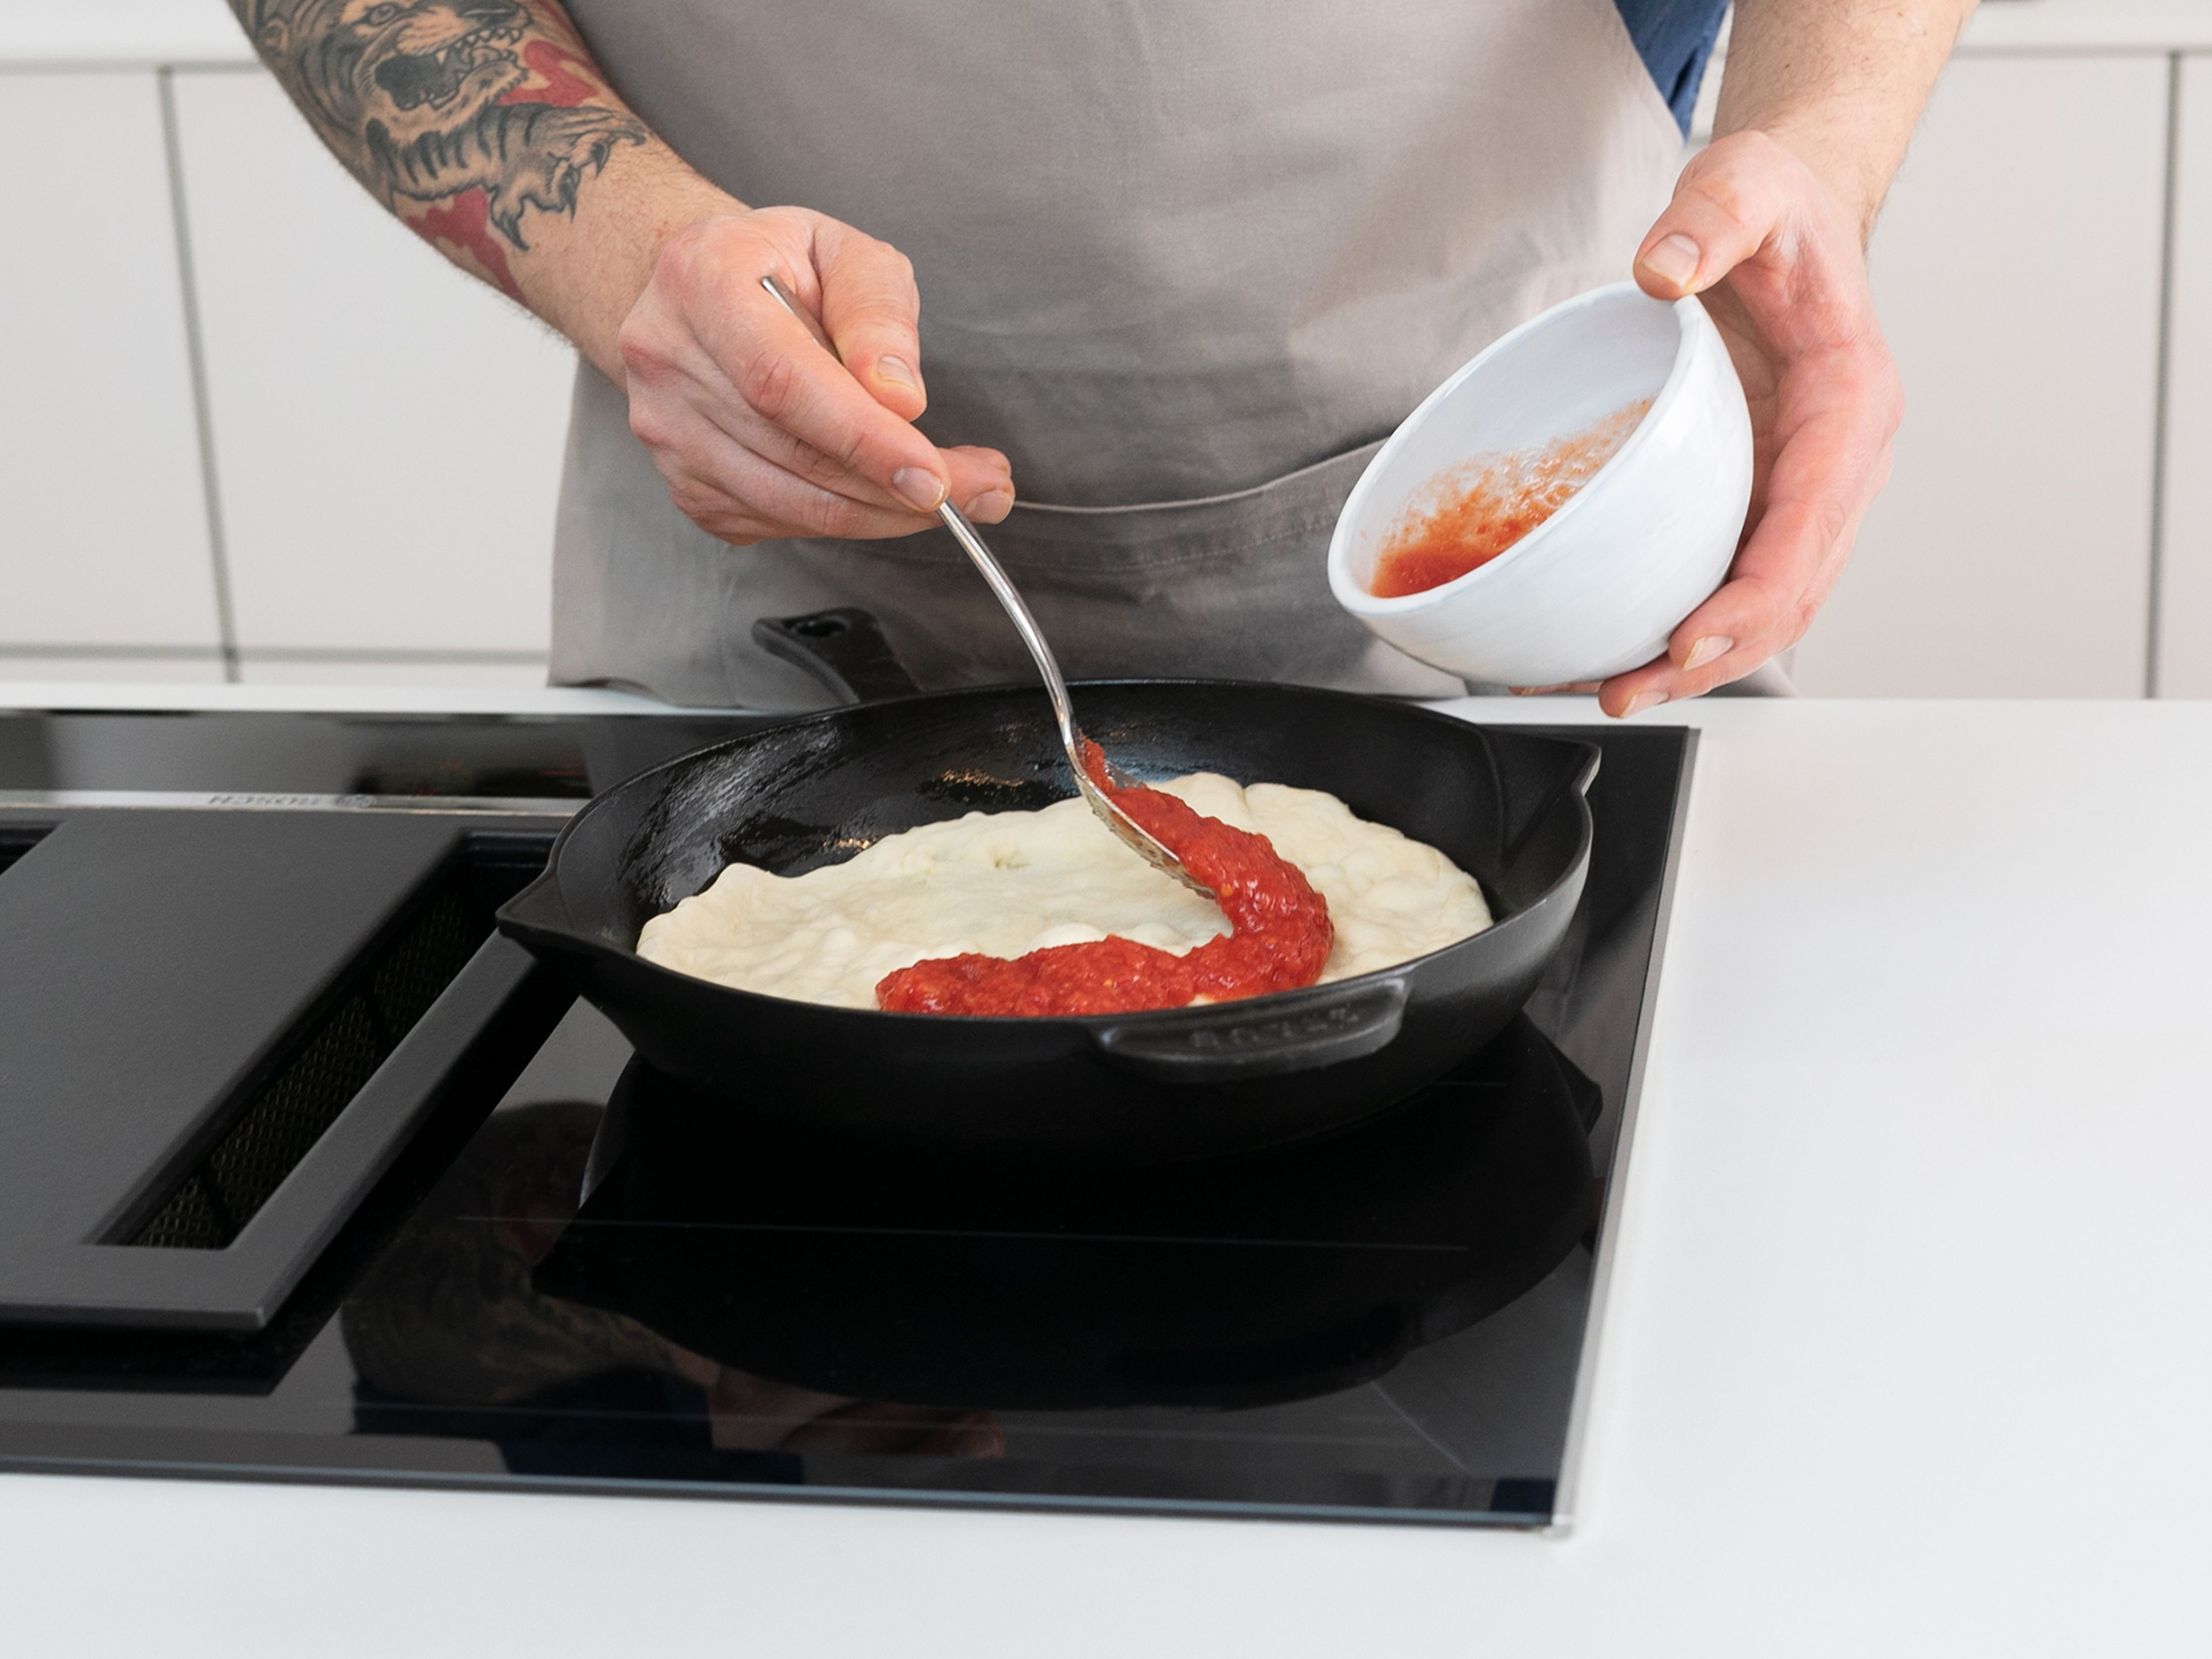 Once the dough has rested, preheat the oven to 250°C/480°F and move a rack to the highest position. Knead dough lightly on a lightly-floured work surface until it’s about the size of the cast iron skillet you will use to cook the pizza. Set the cast iron skillet over medium-high heat. Once the skillet is hot, add remaining olive oil, then transfer crust to the skillet. Let cook for approx. 1 min., then spoon on the sauce evenly over the crust.